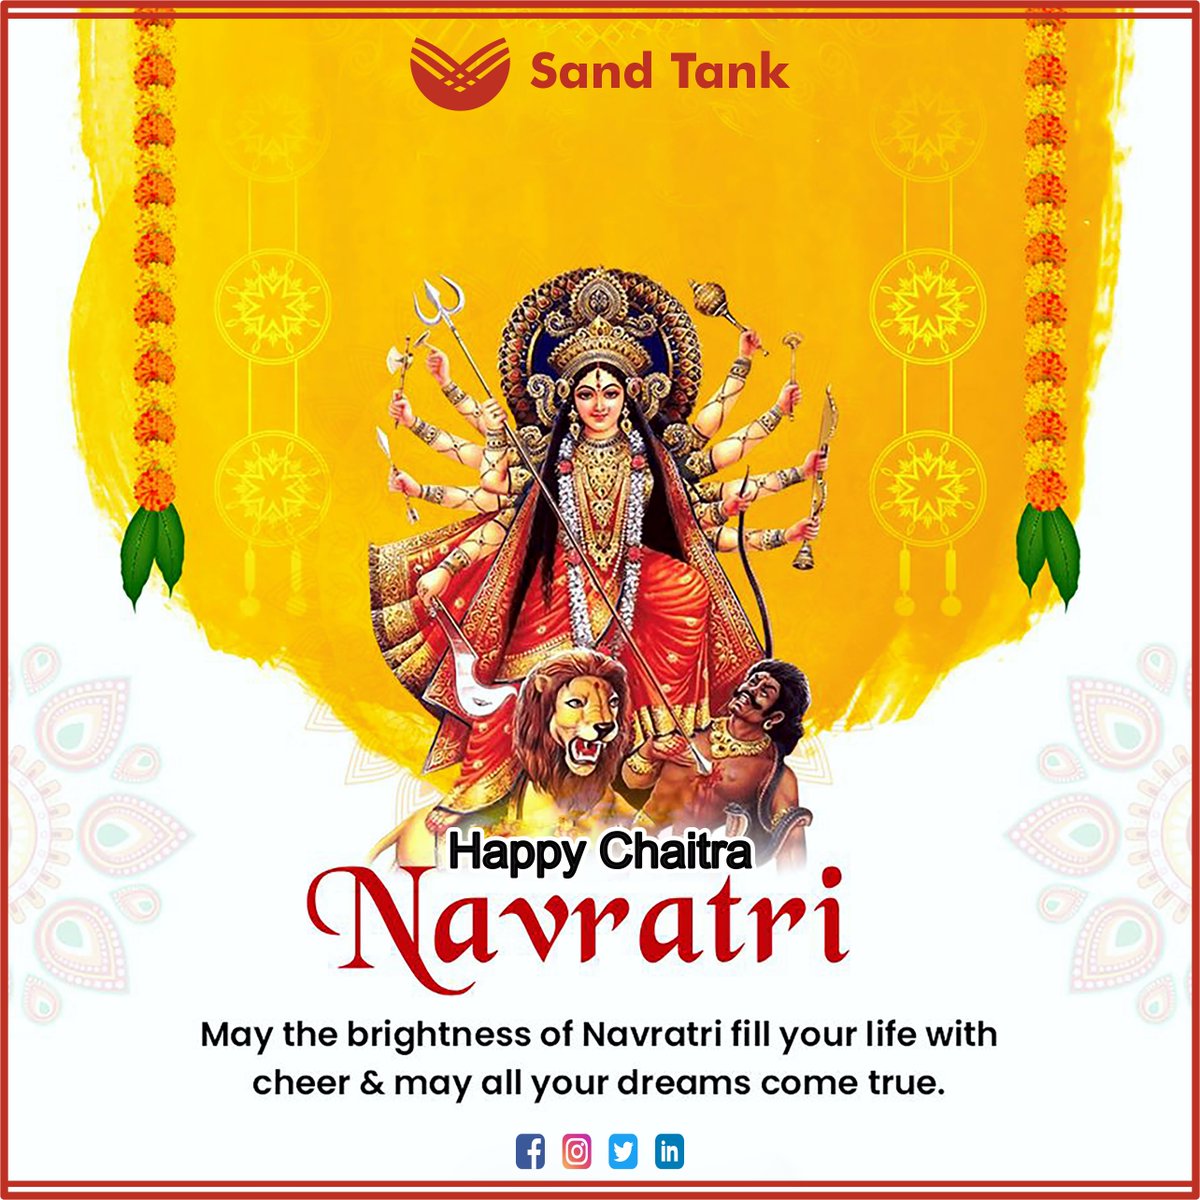 Happy Chaitra Navratri to everyone celebrating! May the auspicious occasion fill your life with joy, harmony, and positivity. Let's welcome the divine energy of Goddess Durga into our hearts. 

#Sandtankfoundation #ChaitraNavratri #NavratriCelebration #GoddessDurga #HinduNewYear